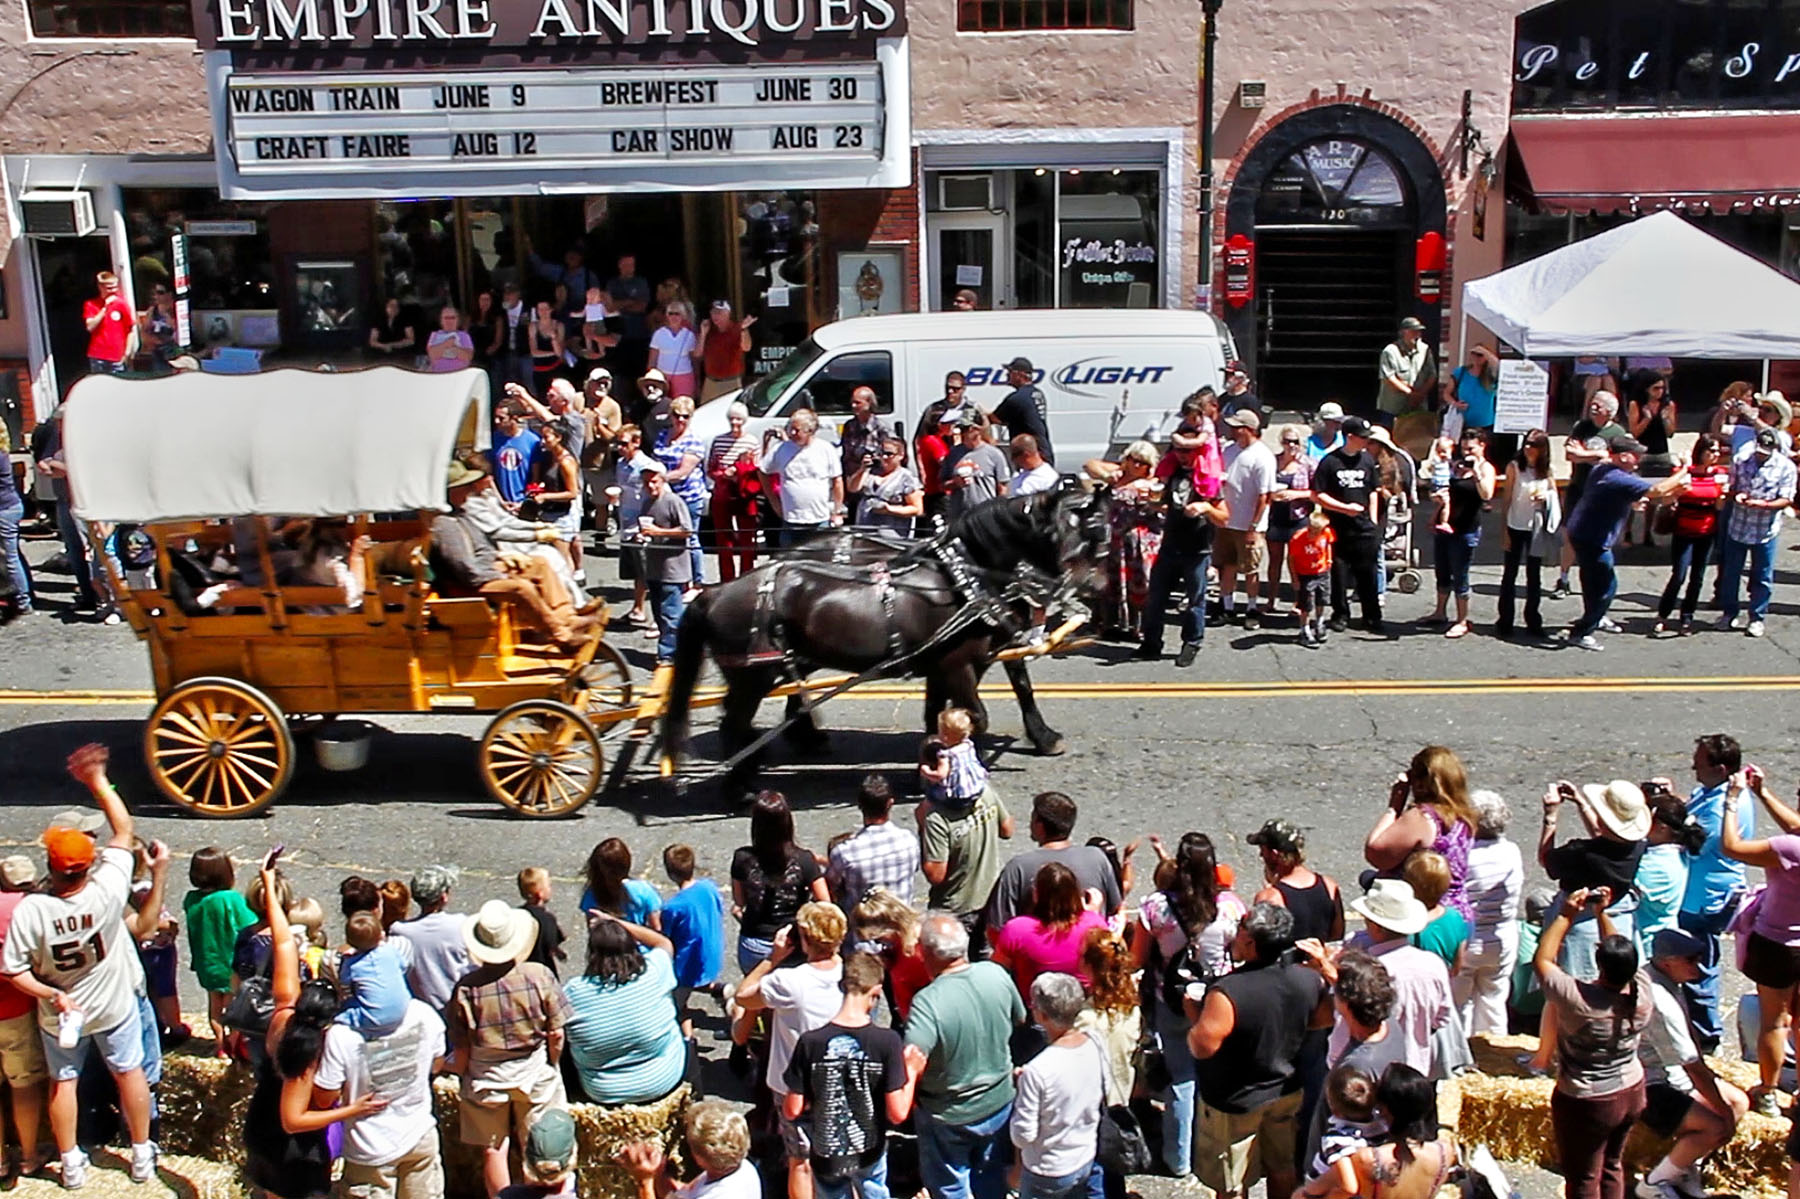 The Wagon Train and Overland Trail Ride has been a community heritage program in Placerville for more than 60 years. 